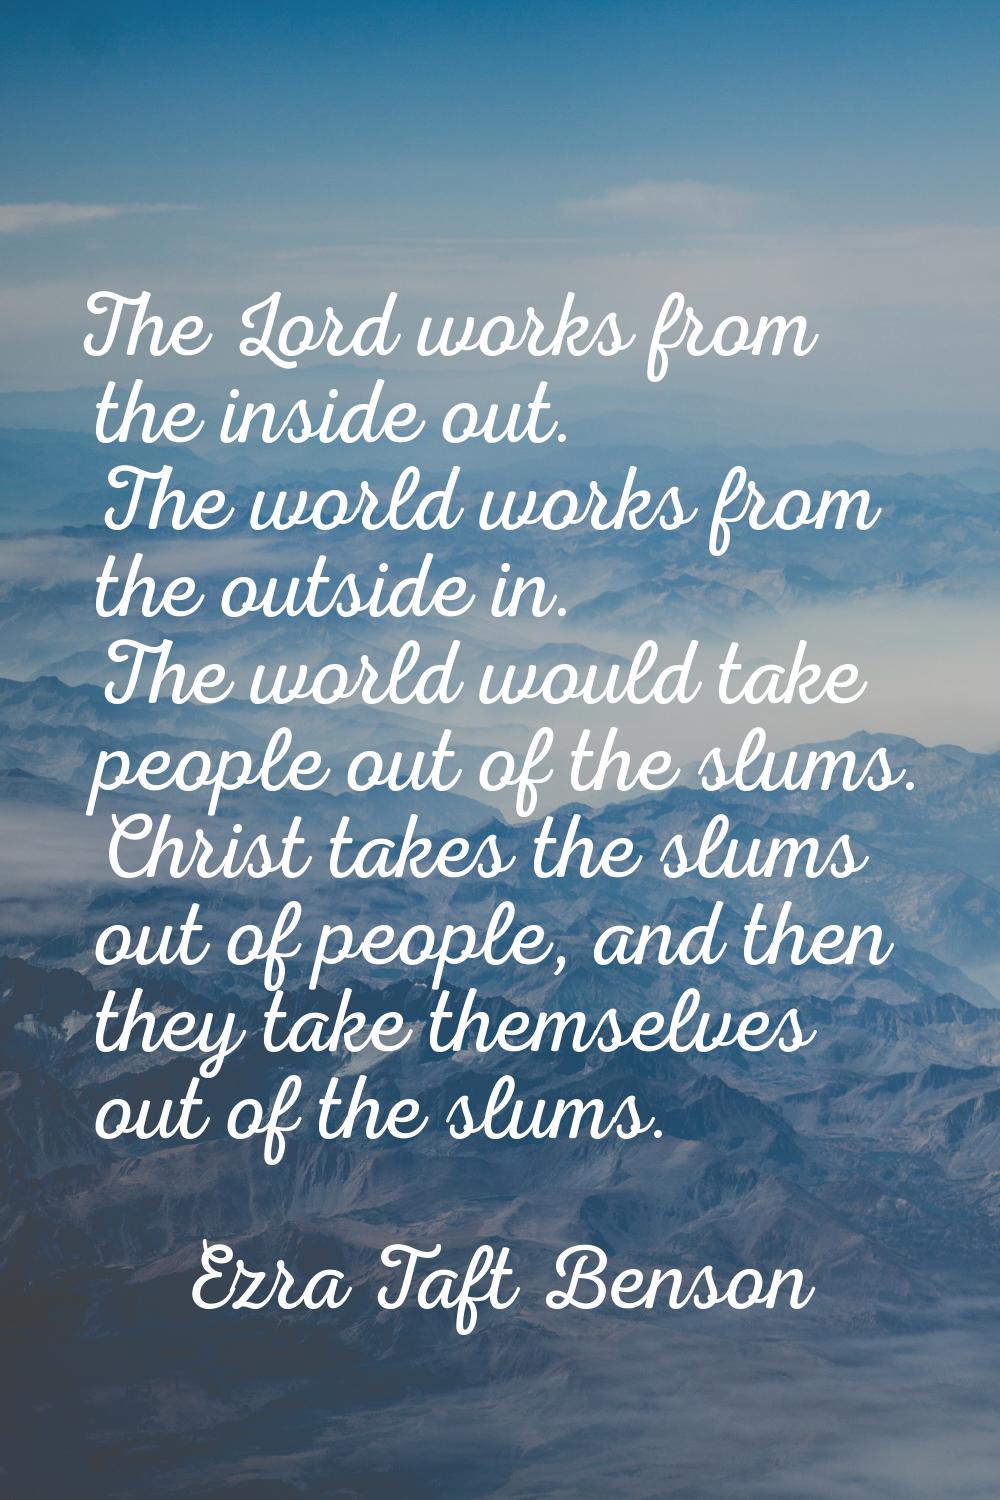 The Lord works from the inside out. The world works from the outside in. The world would take peopl